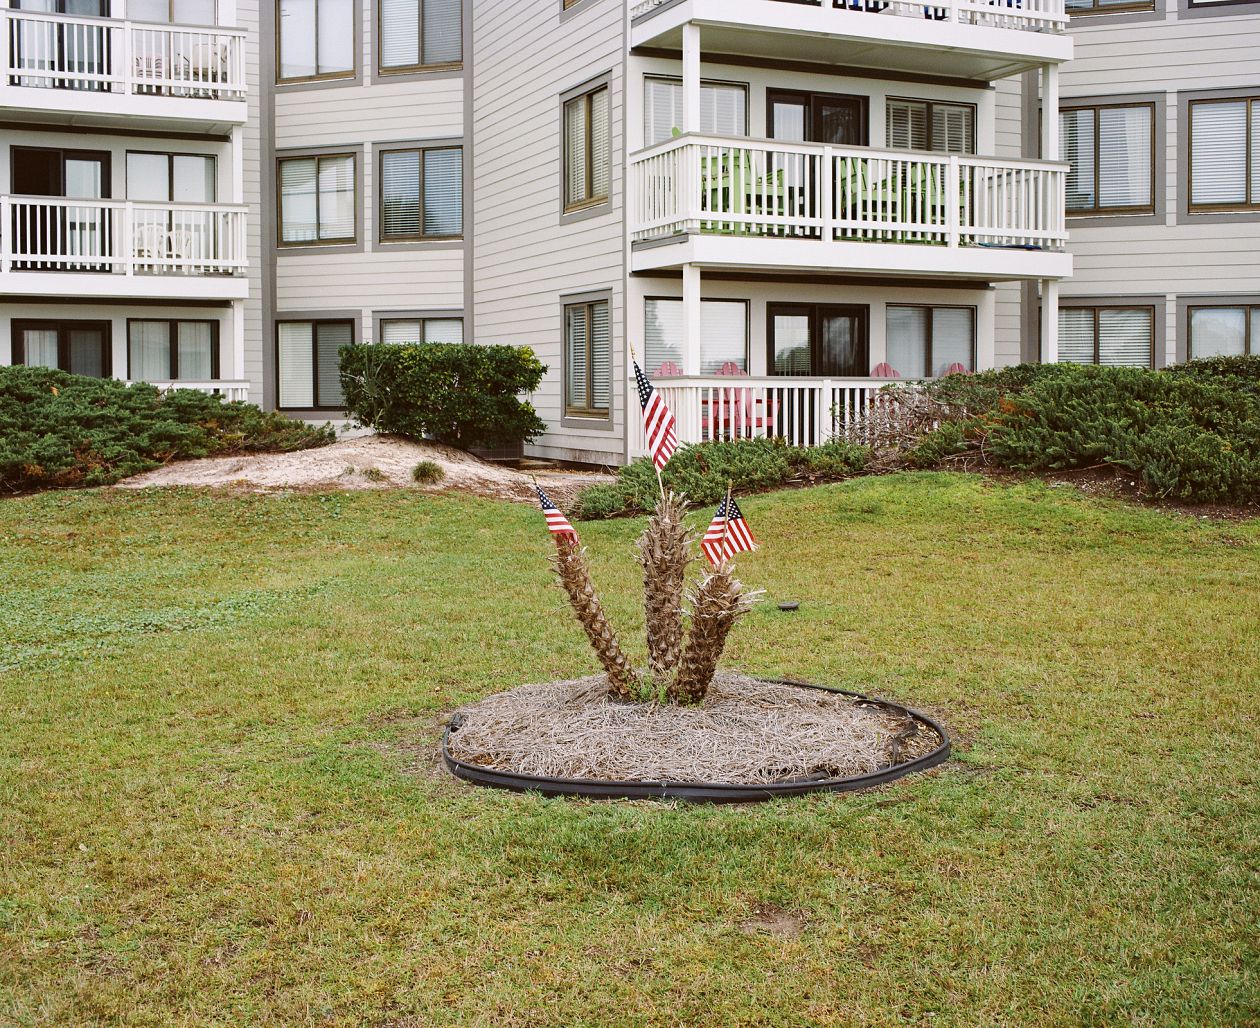 Modern apartment building exterior with green grass lawn and flower bed in front.